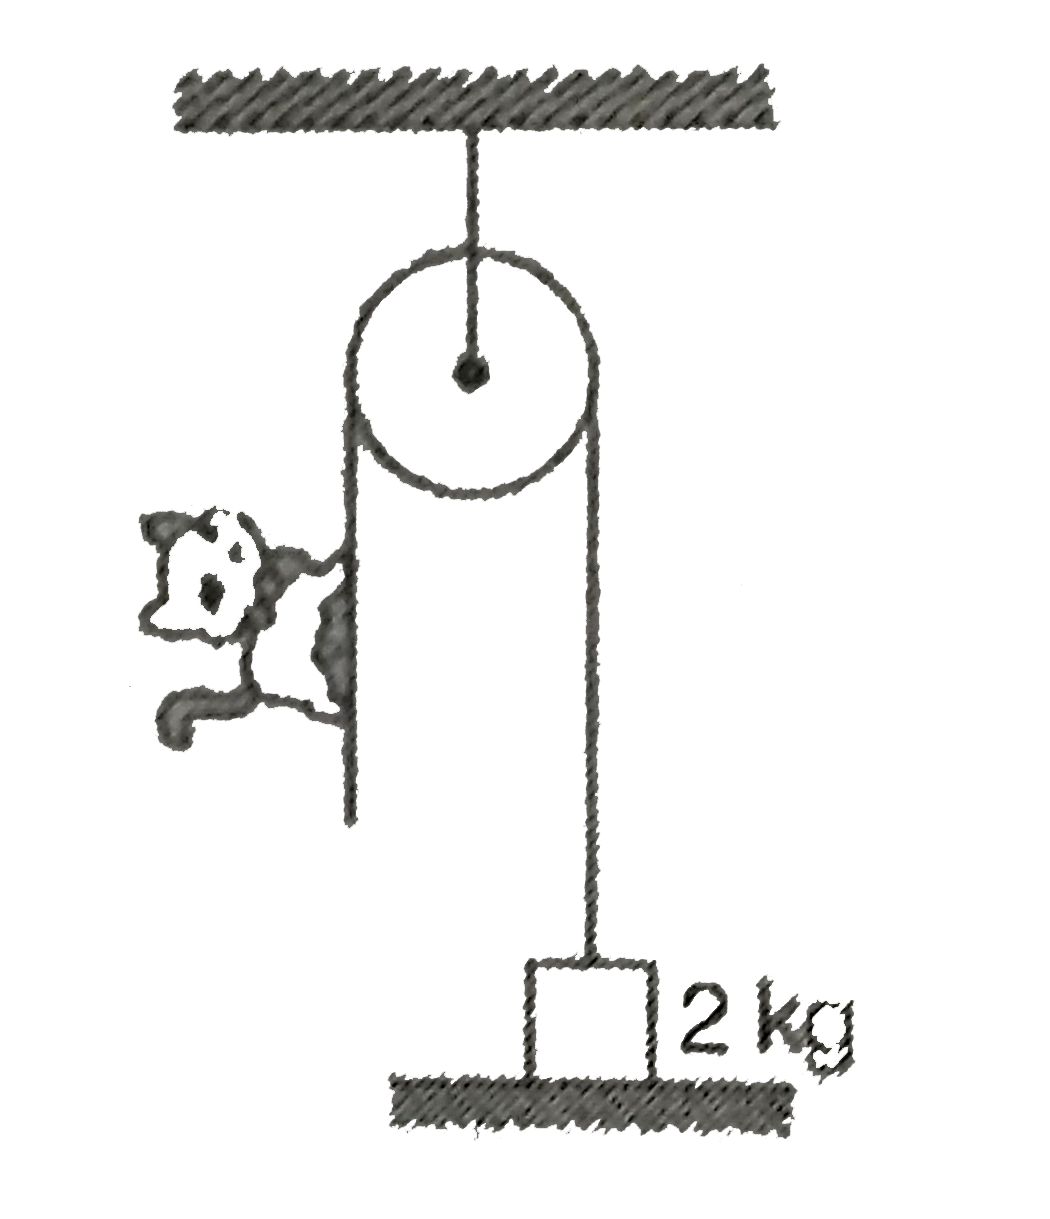 The pulley shown in the diagram is frictionless. A cat of mass 1kg moves up on the massless string so as to just lift a block of mass 2kg. After some time, the cal stops moving with respect to the string. The magnitude of the change in the cat's accelration is